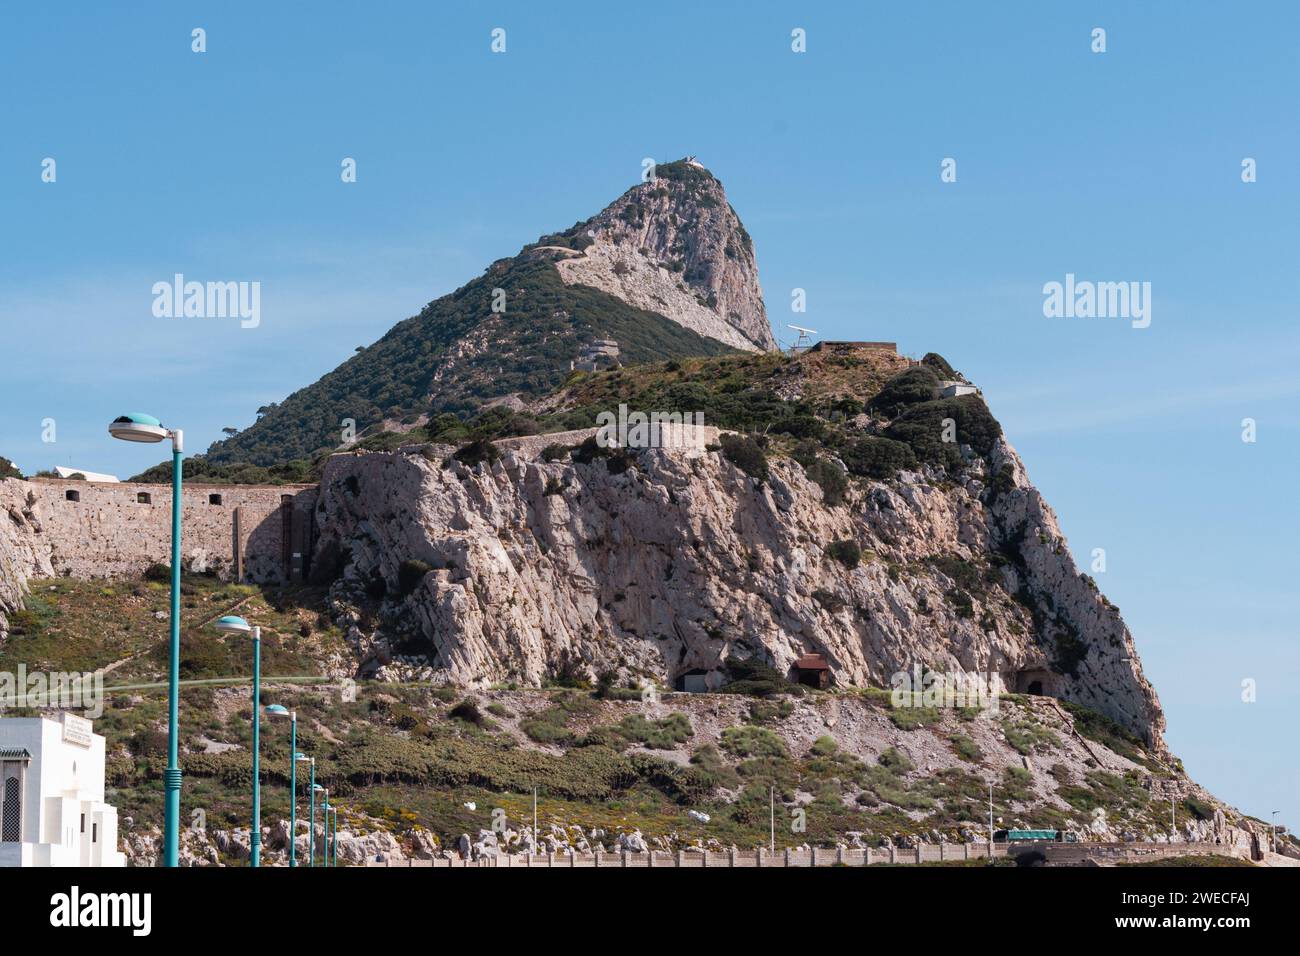 The Rock of Gibraltar: A majestic coastal landmark, a geological wonder, and a symbol of British heritage overlooking the Mediterranean. Stock Photo